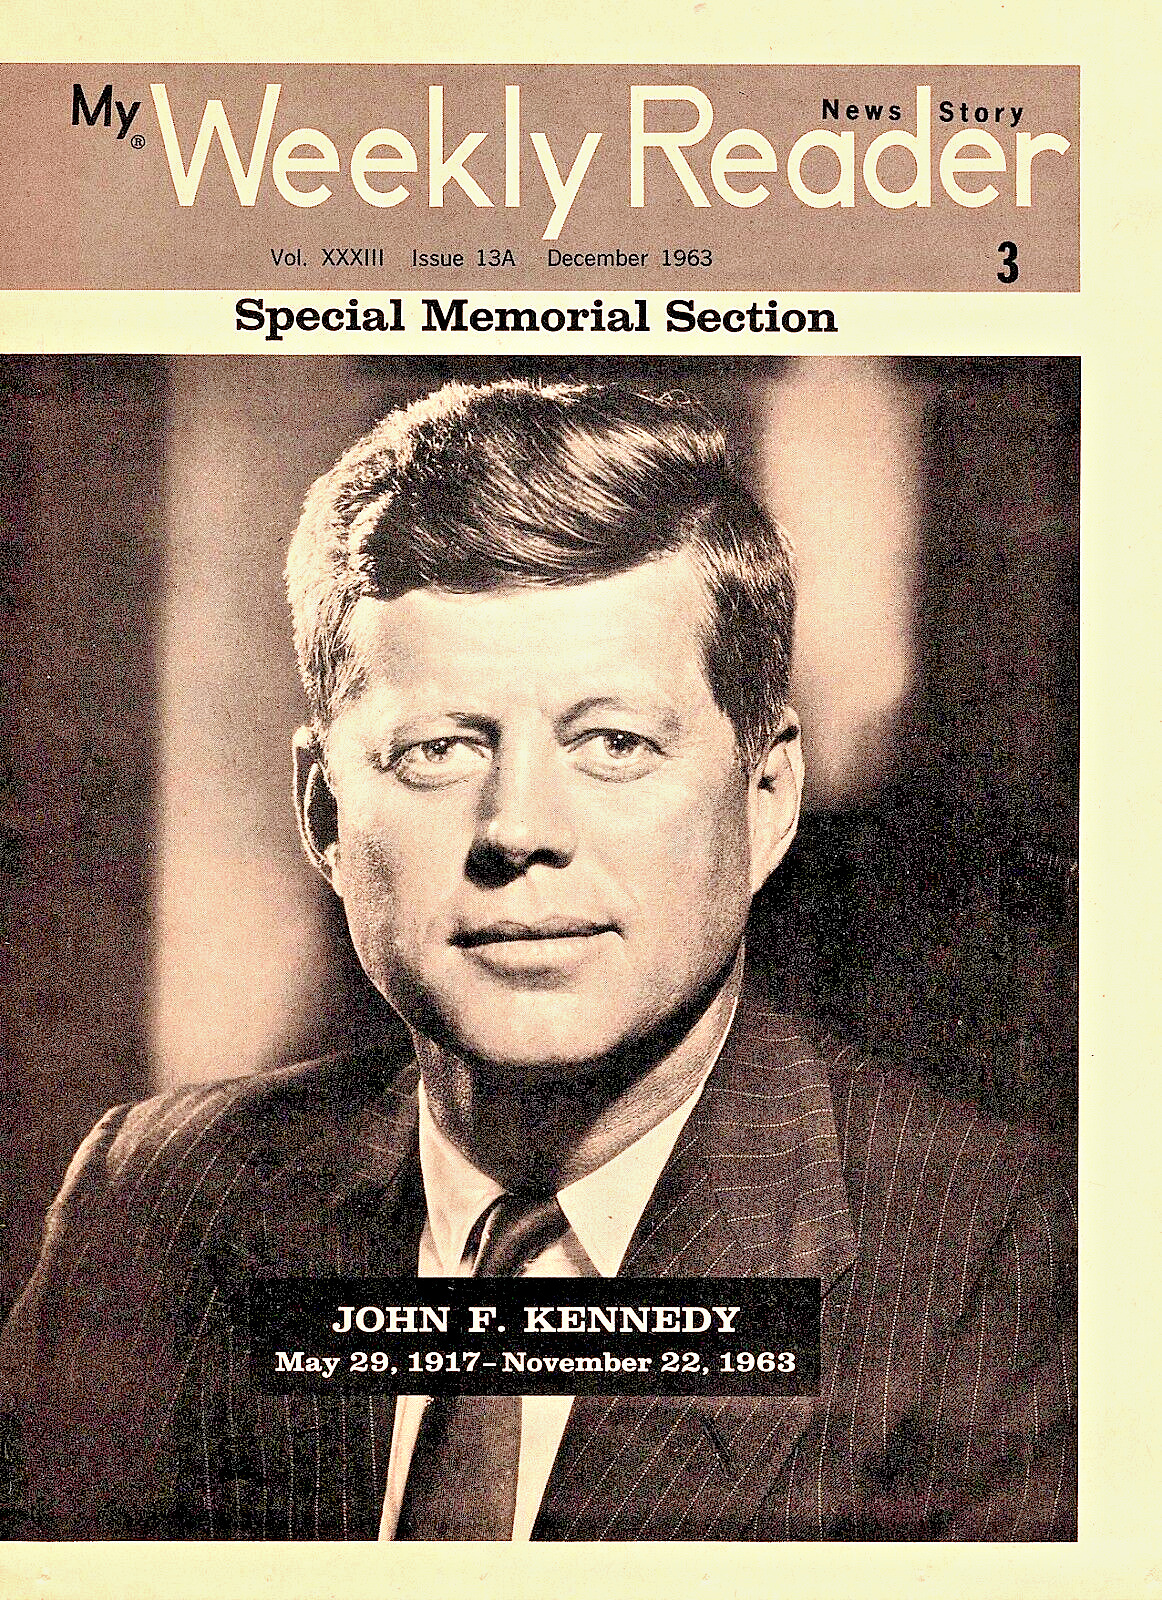 Vintage John F. Kennedy My Weekly Reader Special Memorial Section NewsStory 1963